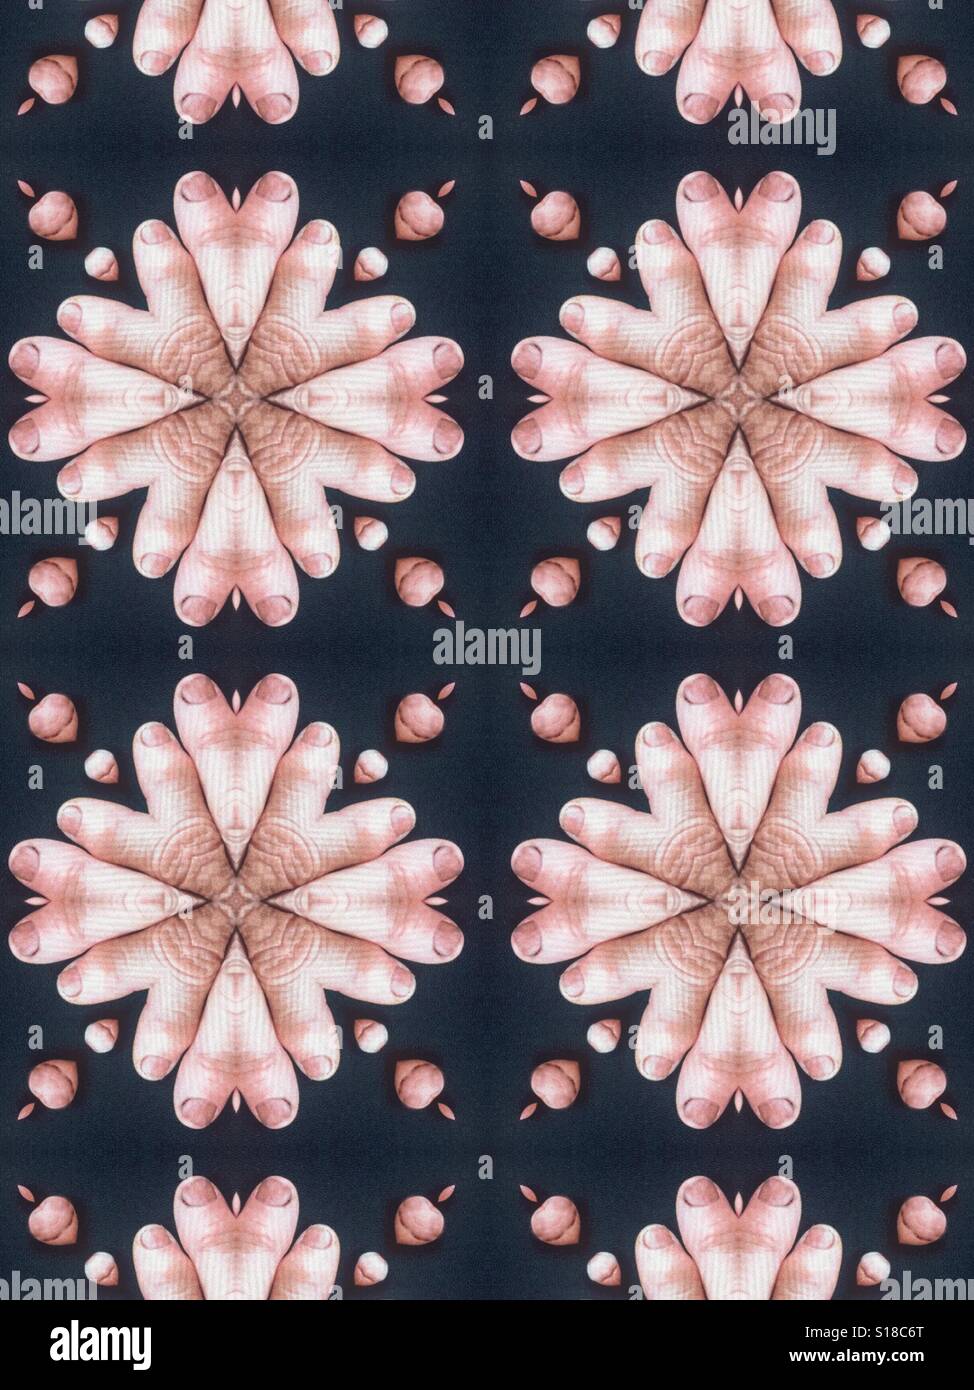 An abstract conceptual image of flower starbursts made from human fingers Stock Photo